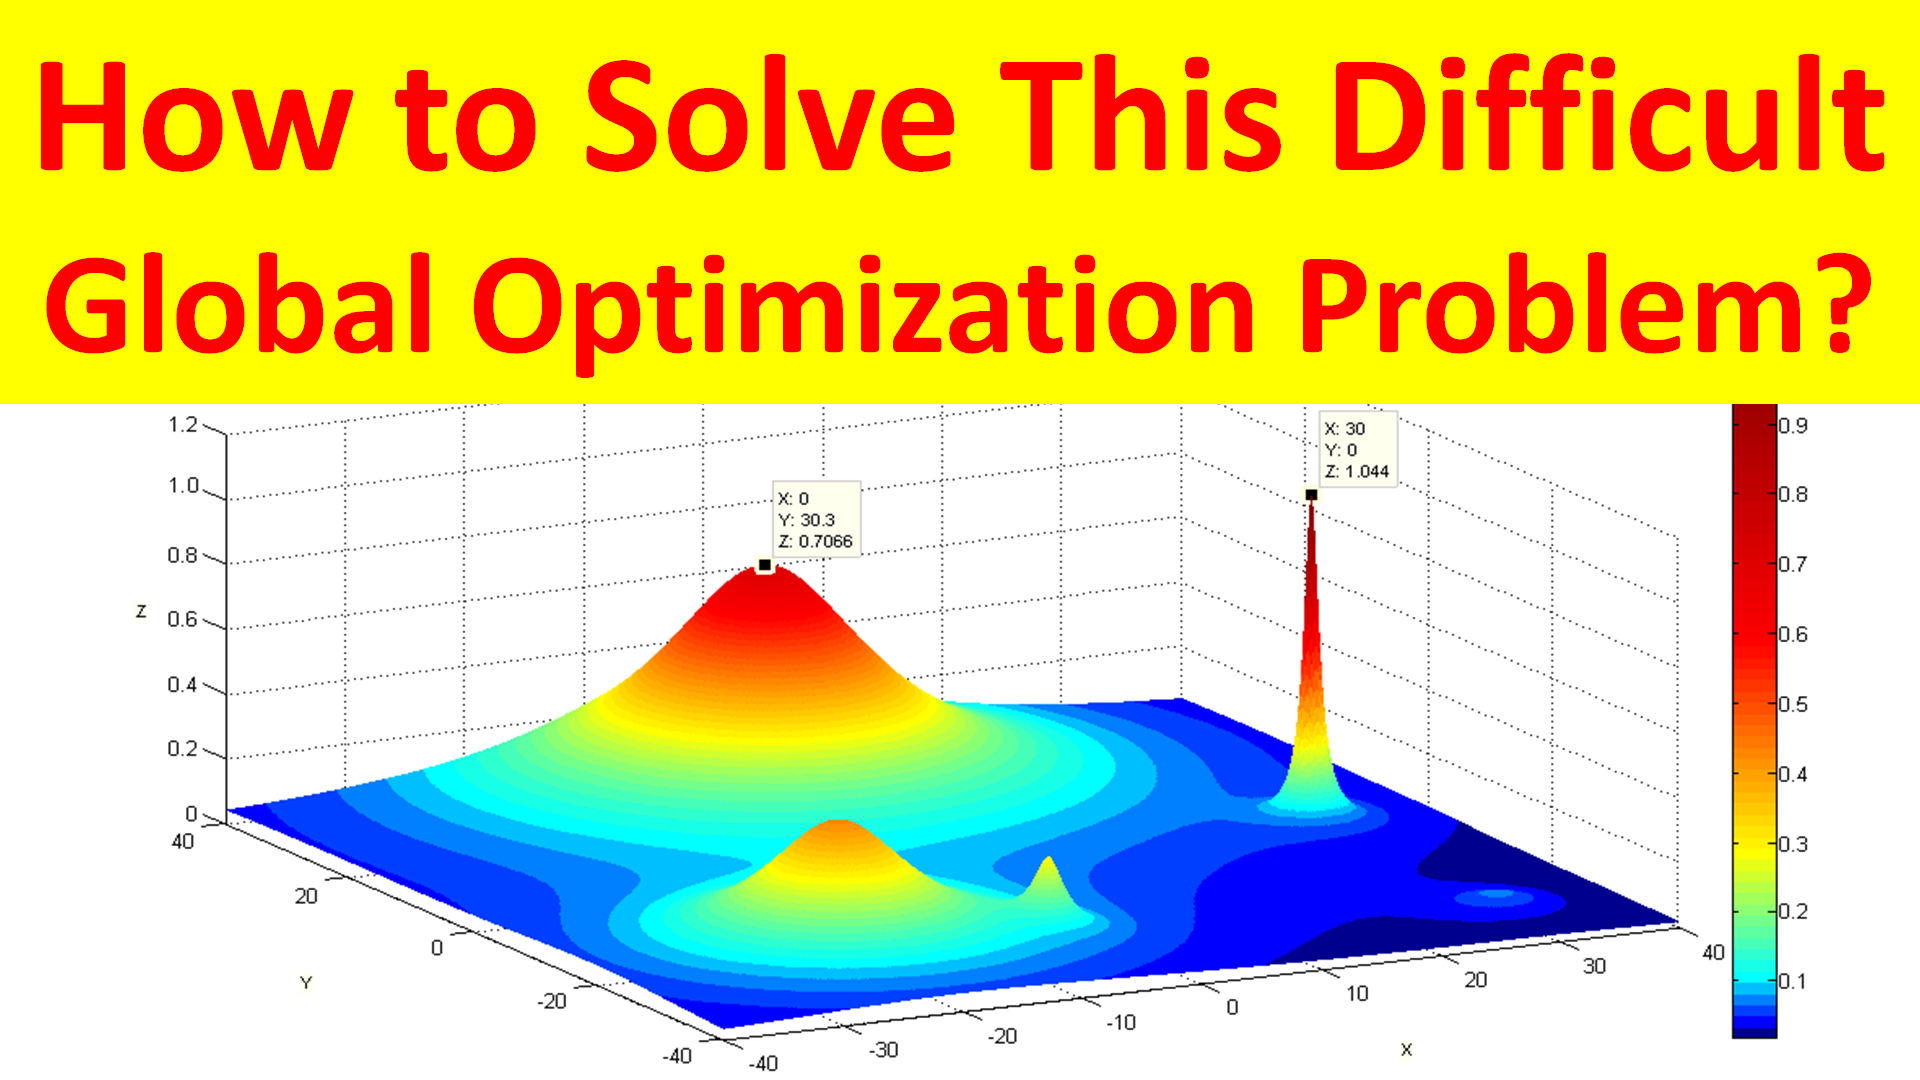 How to Solve This Difficult Global Optimization Problem?